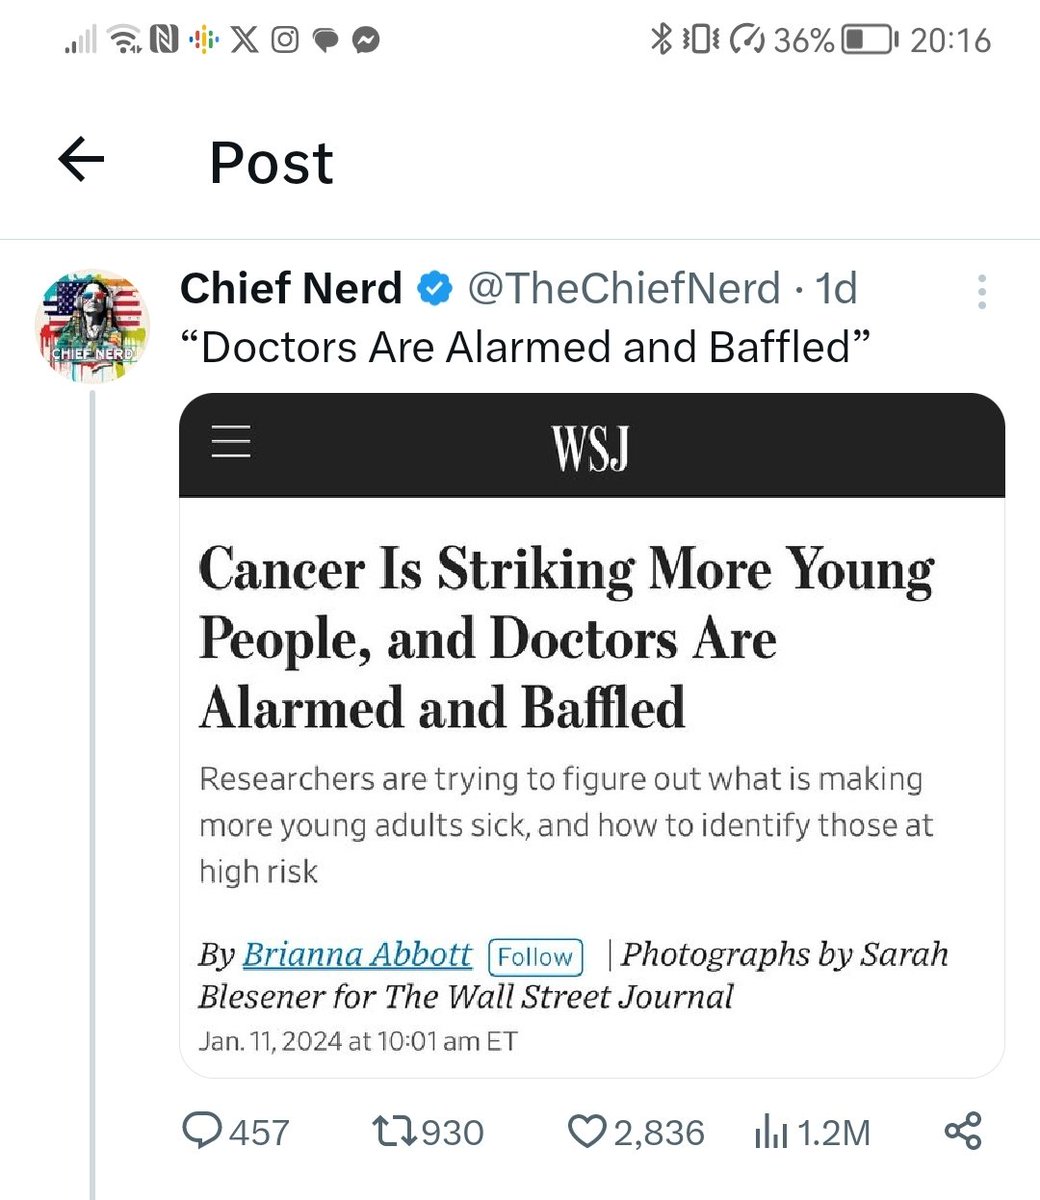 Anti-vax grifters are citing a WSJ article about an alarming rise in Cancer as proof the Covid vaccines are harmful.... the WSJ are citing a study that took place from 1990 to 2019 - prior to Covid vaccines. #TryReading.